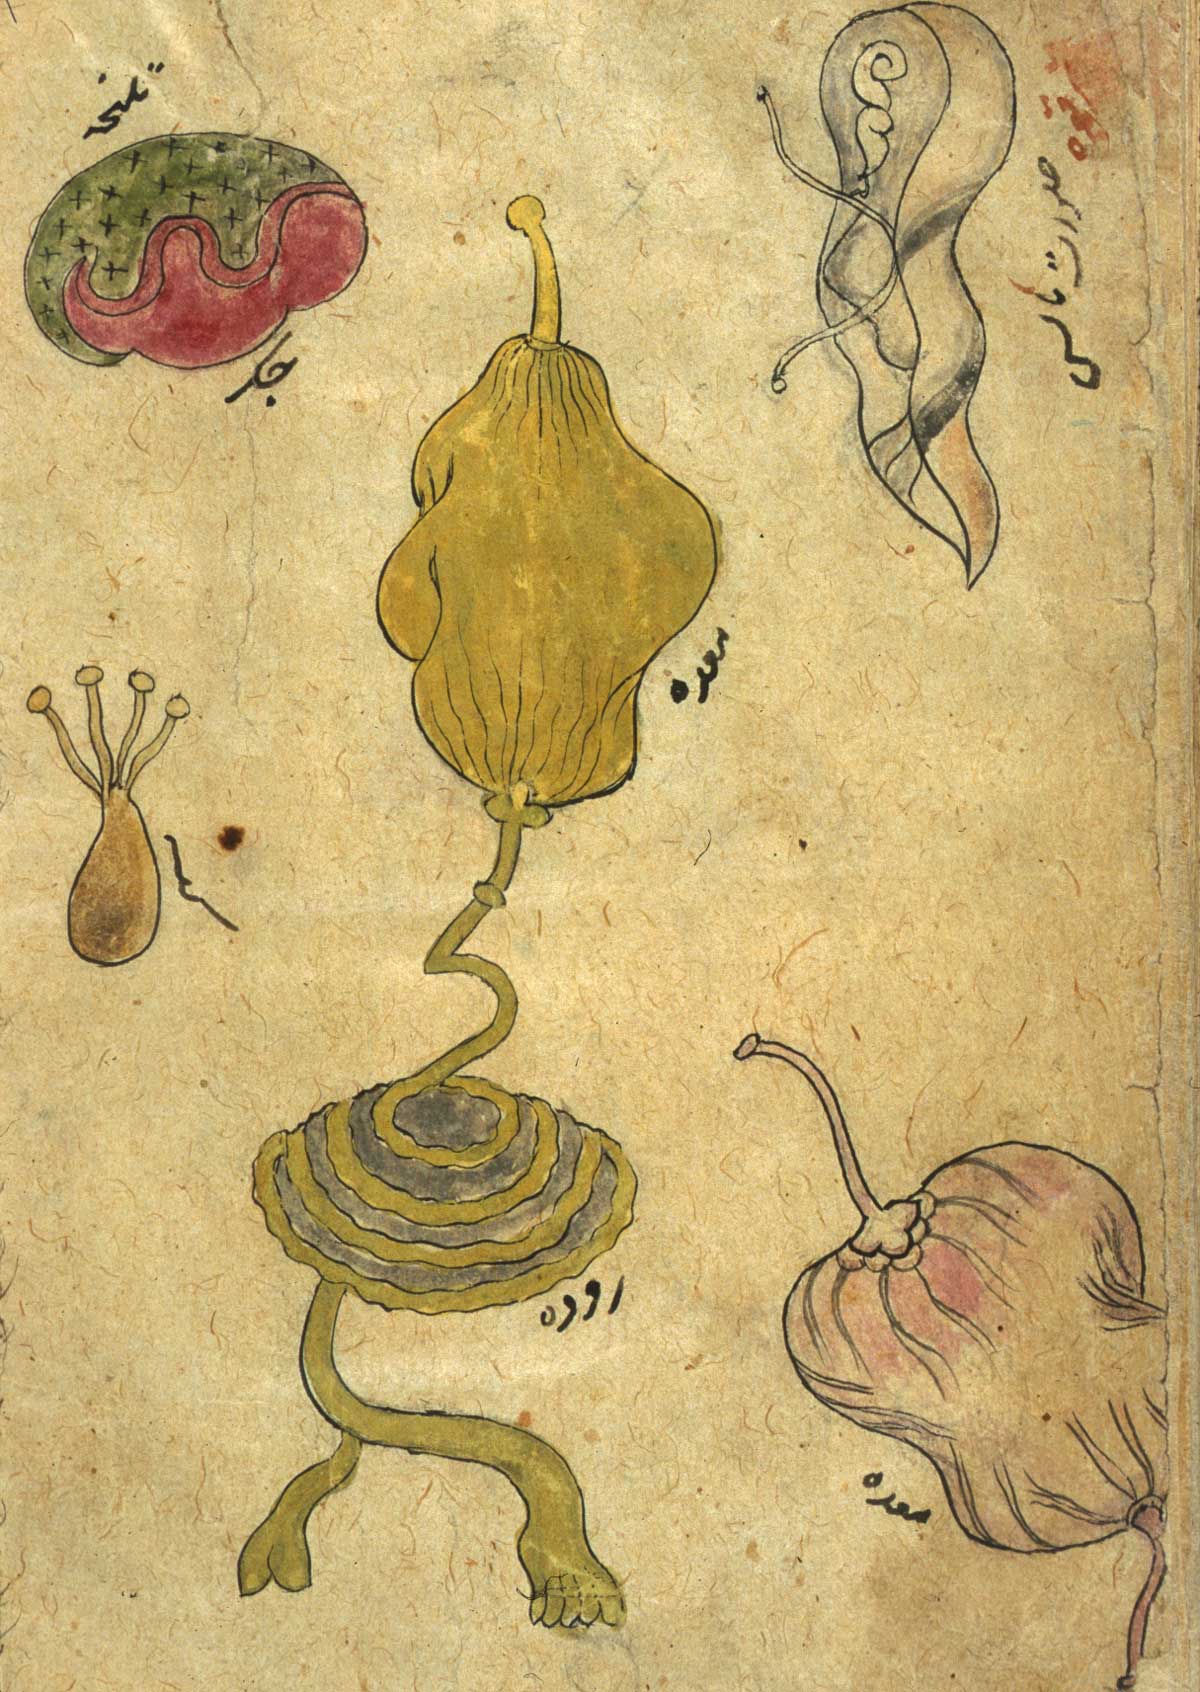 Drawings of individual organs in inks and opaque watercolors. Illustated are [in upper left] the liver with gallbladder, [in the center] the stomach with intestines, [lower left] the testicles, [lower right] a detail of the stomach, and something unidentified in upper right corner. Undated and unsigned, probably 18th century, India, from NLM MS P 20.